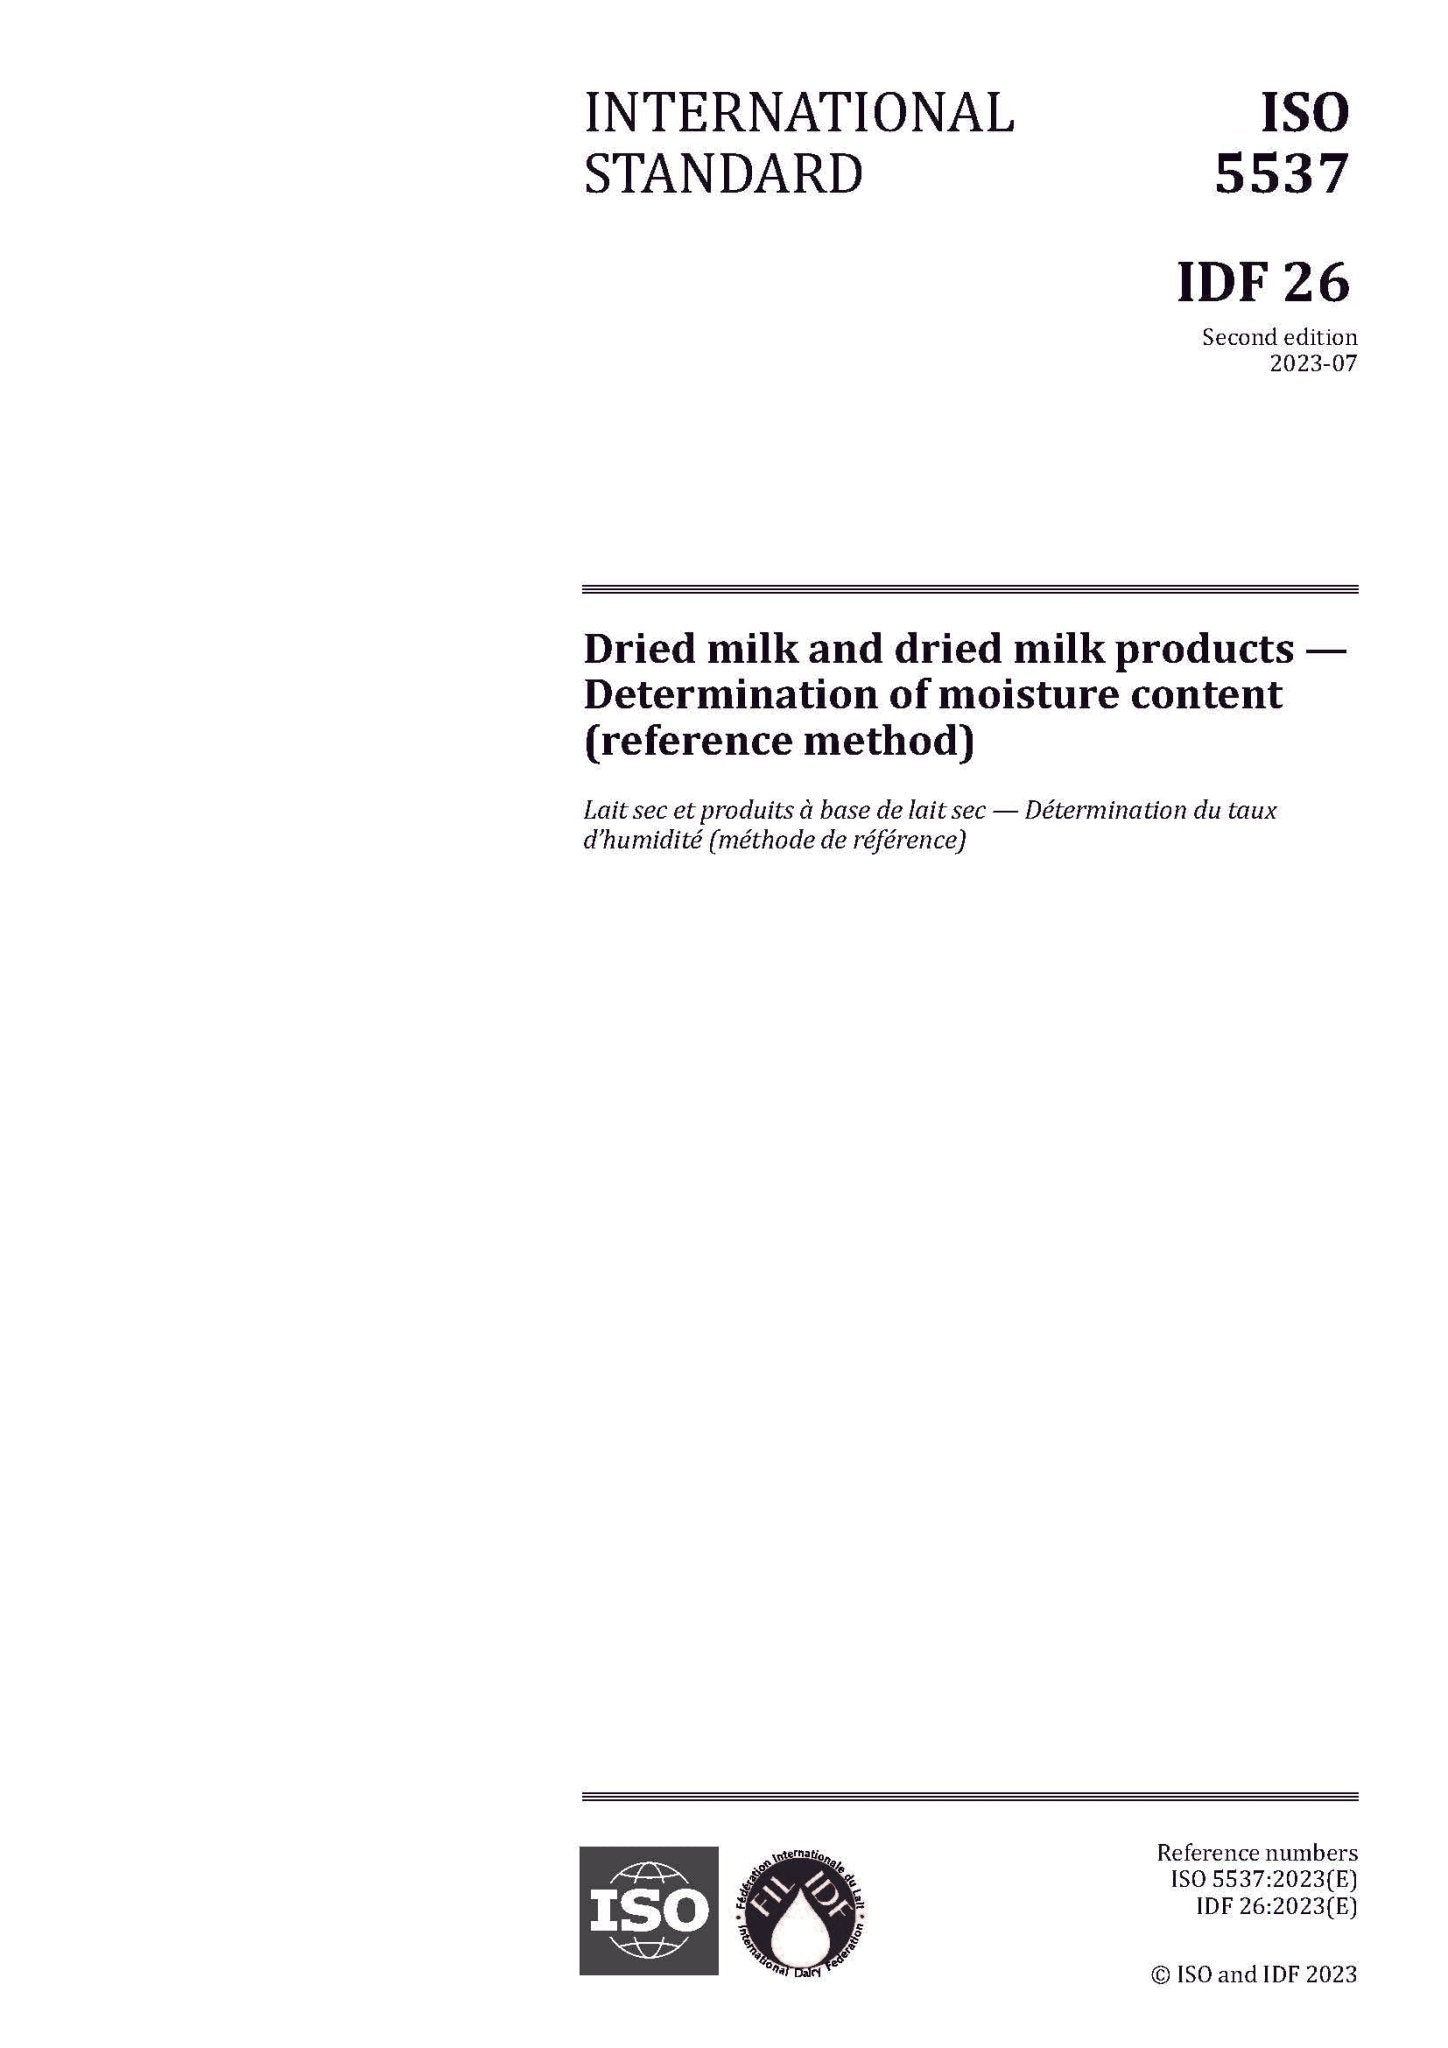 ISO 5537 | IDF 26: 2023 - Dried milk and dried milk products — Determination of moisture content (reference method) - FIL-IDF